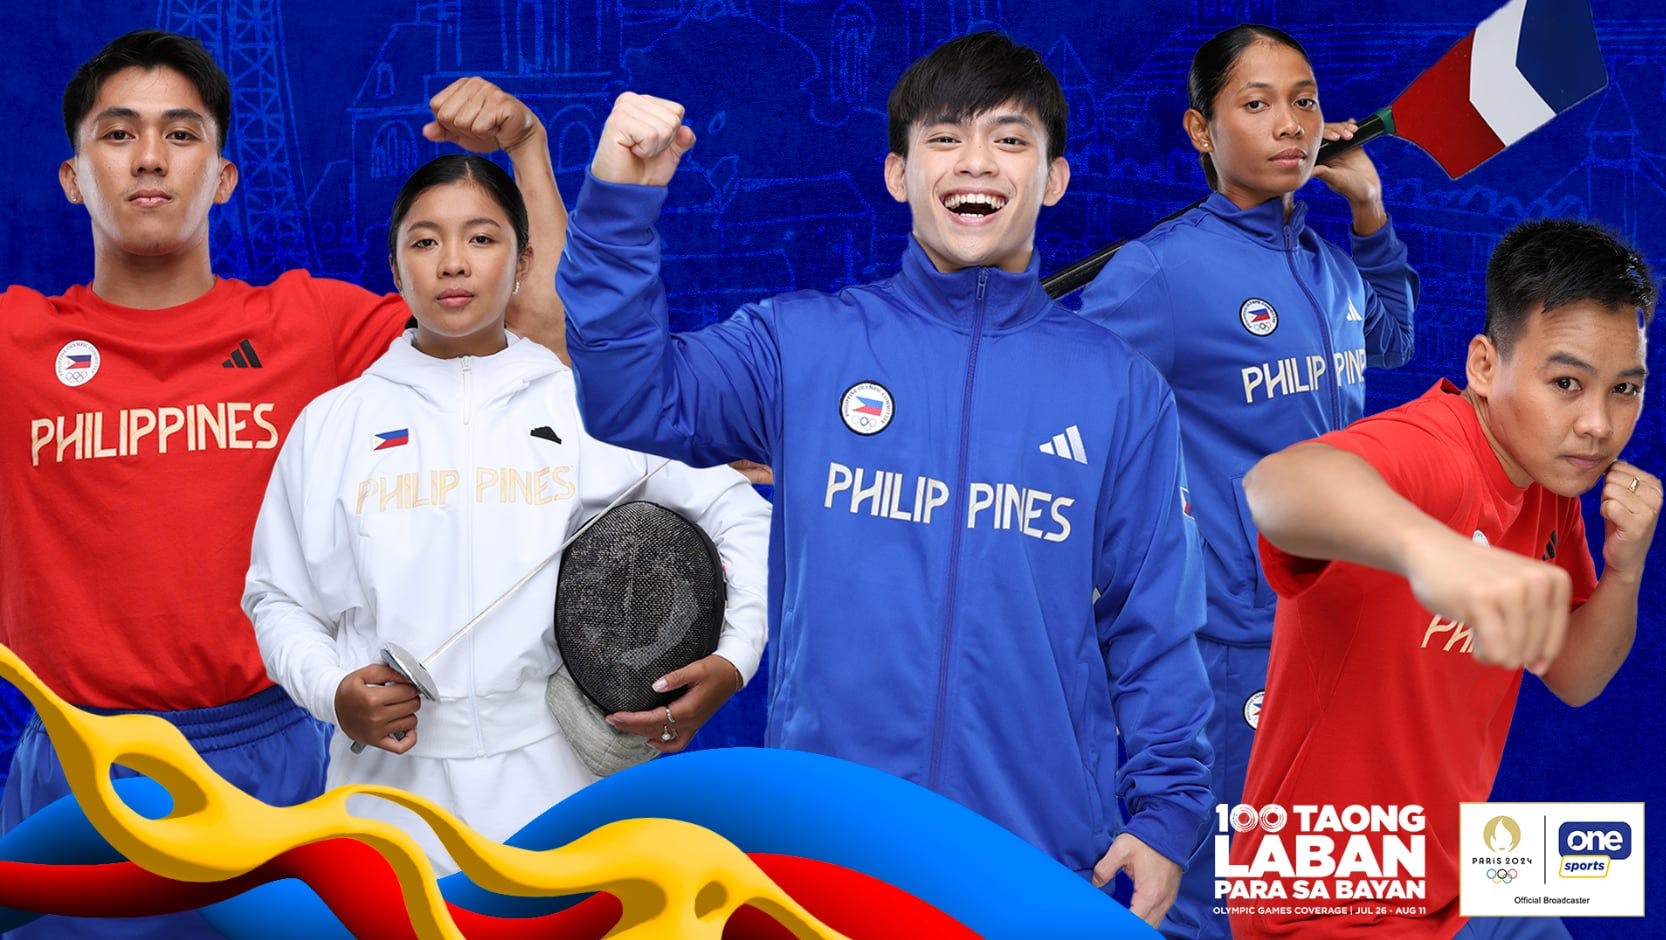 SCHEDULE: Philippine athletes at the Olympic Games Paris 2024 and where to watch